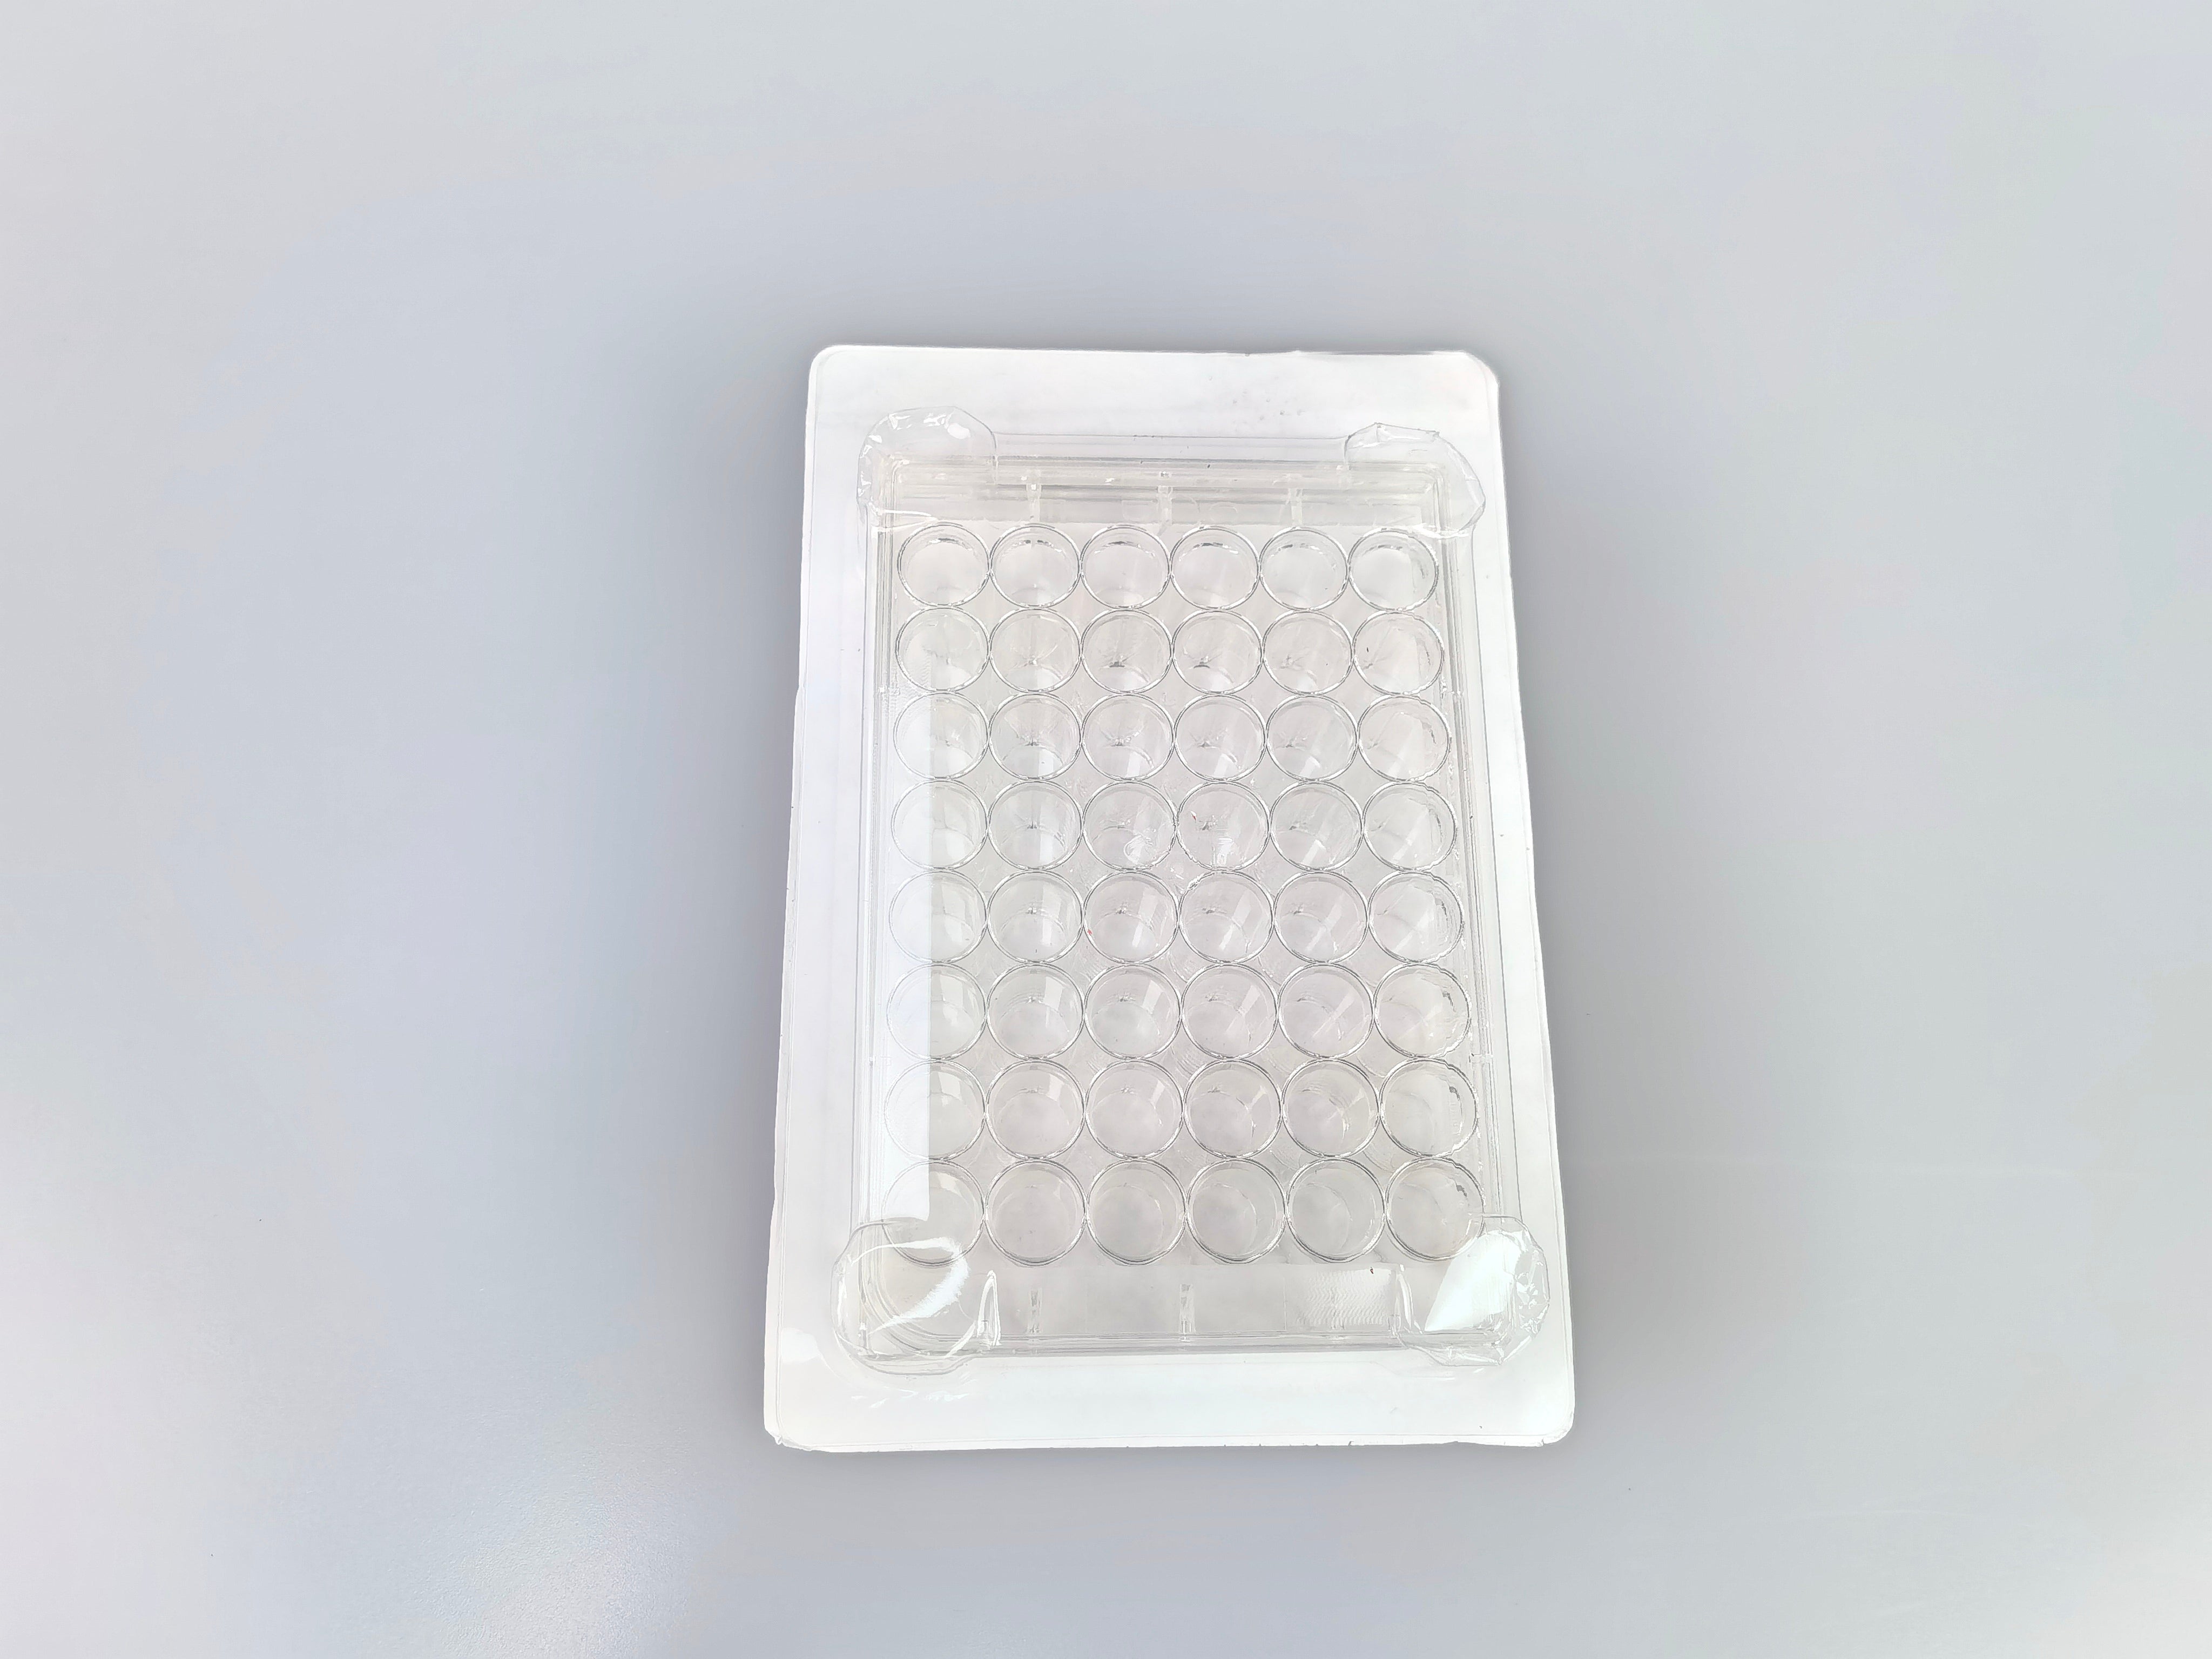 48 Well Cell Culture Plate